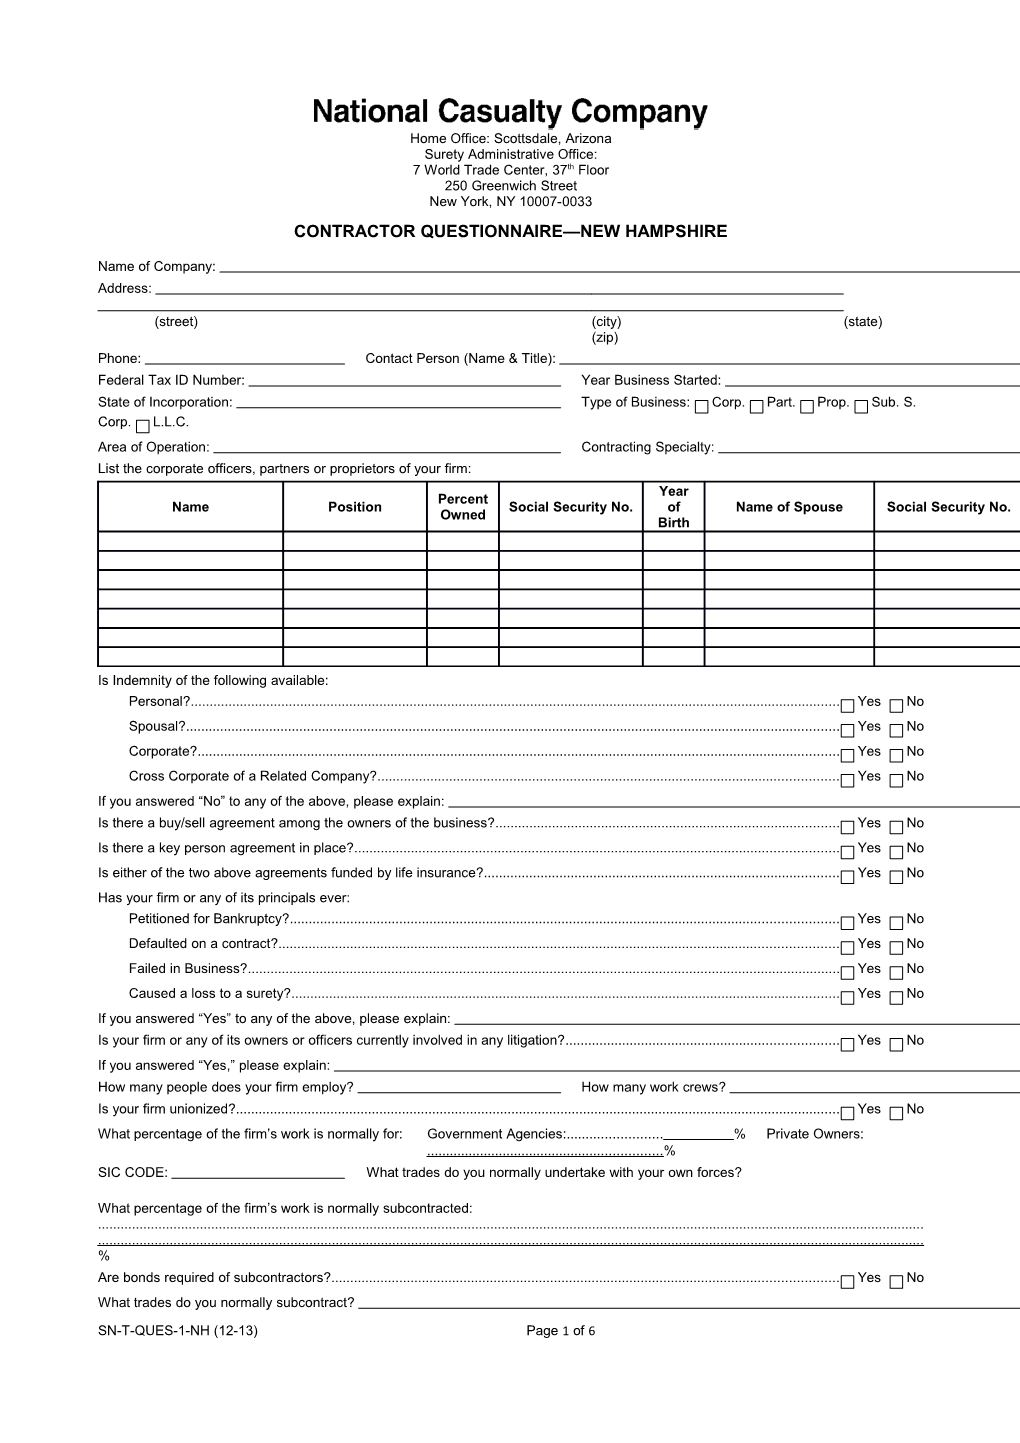 Contractor Questionnaire New Hampshire